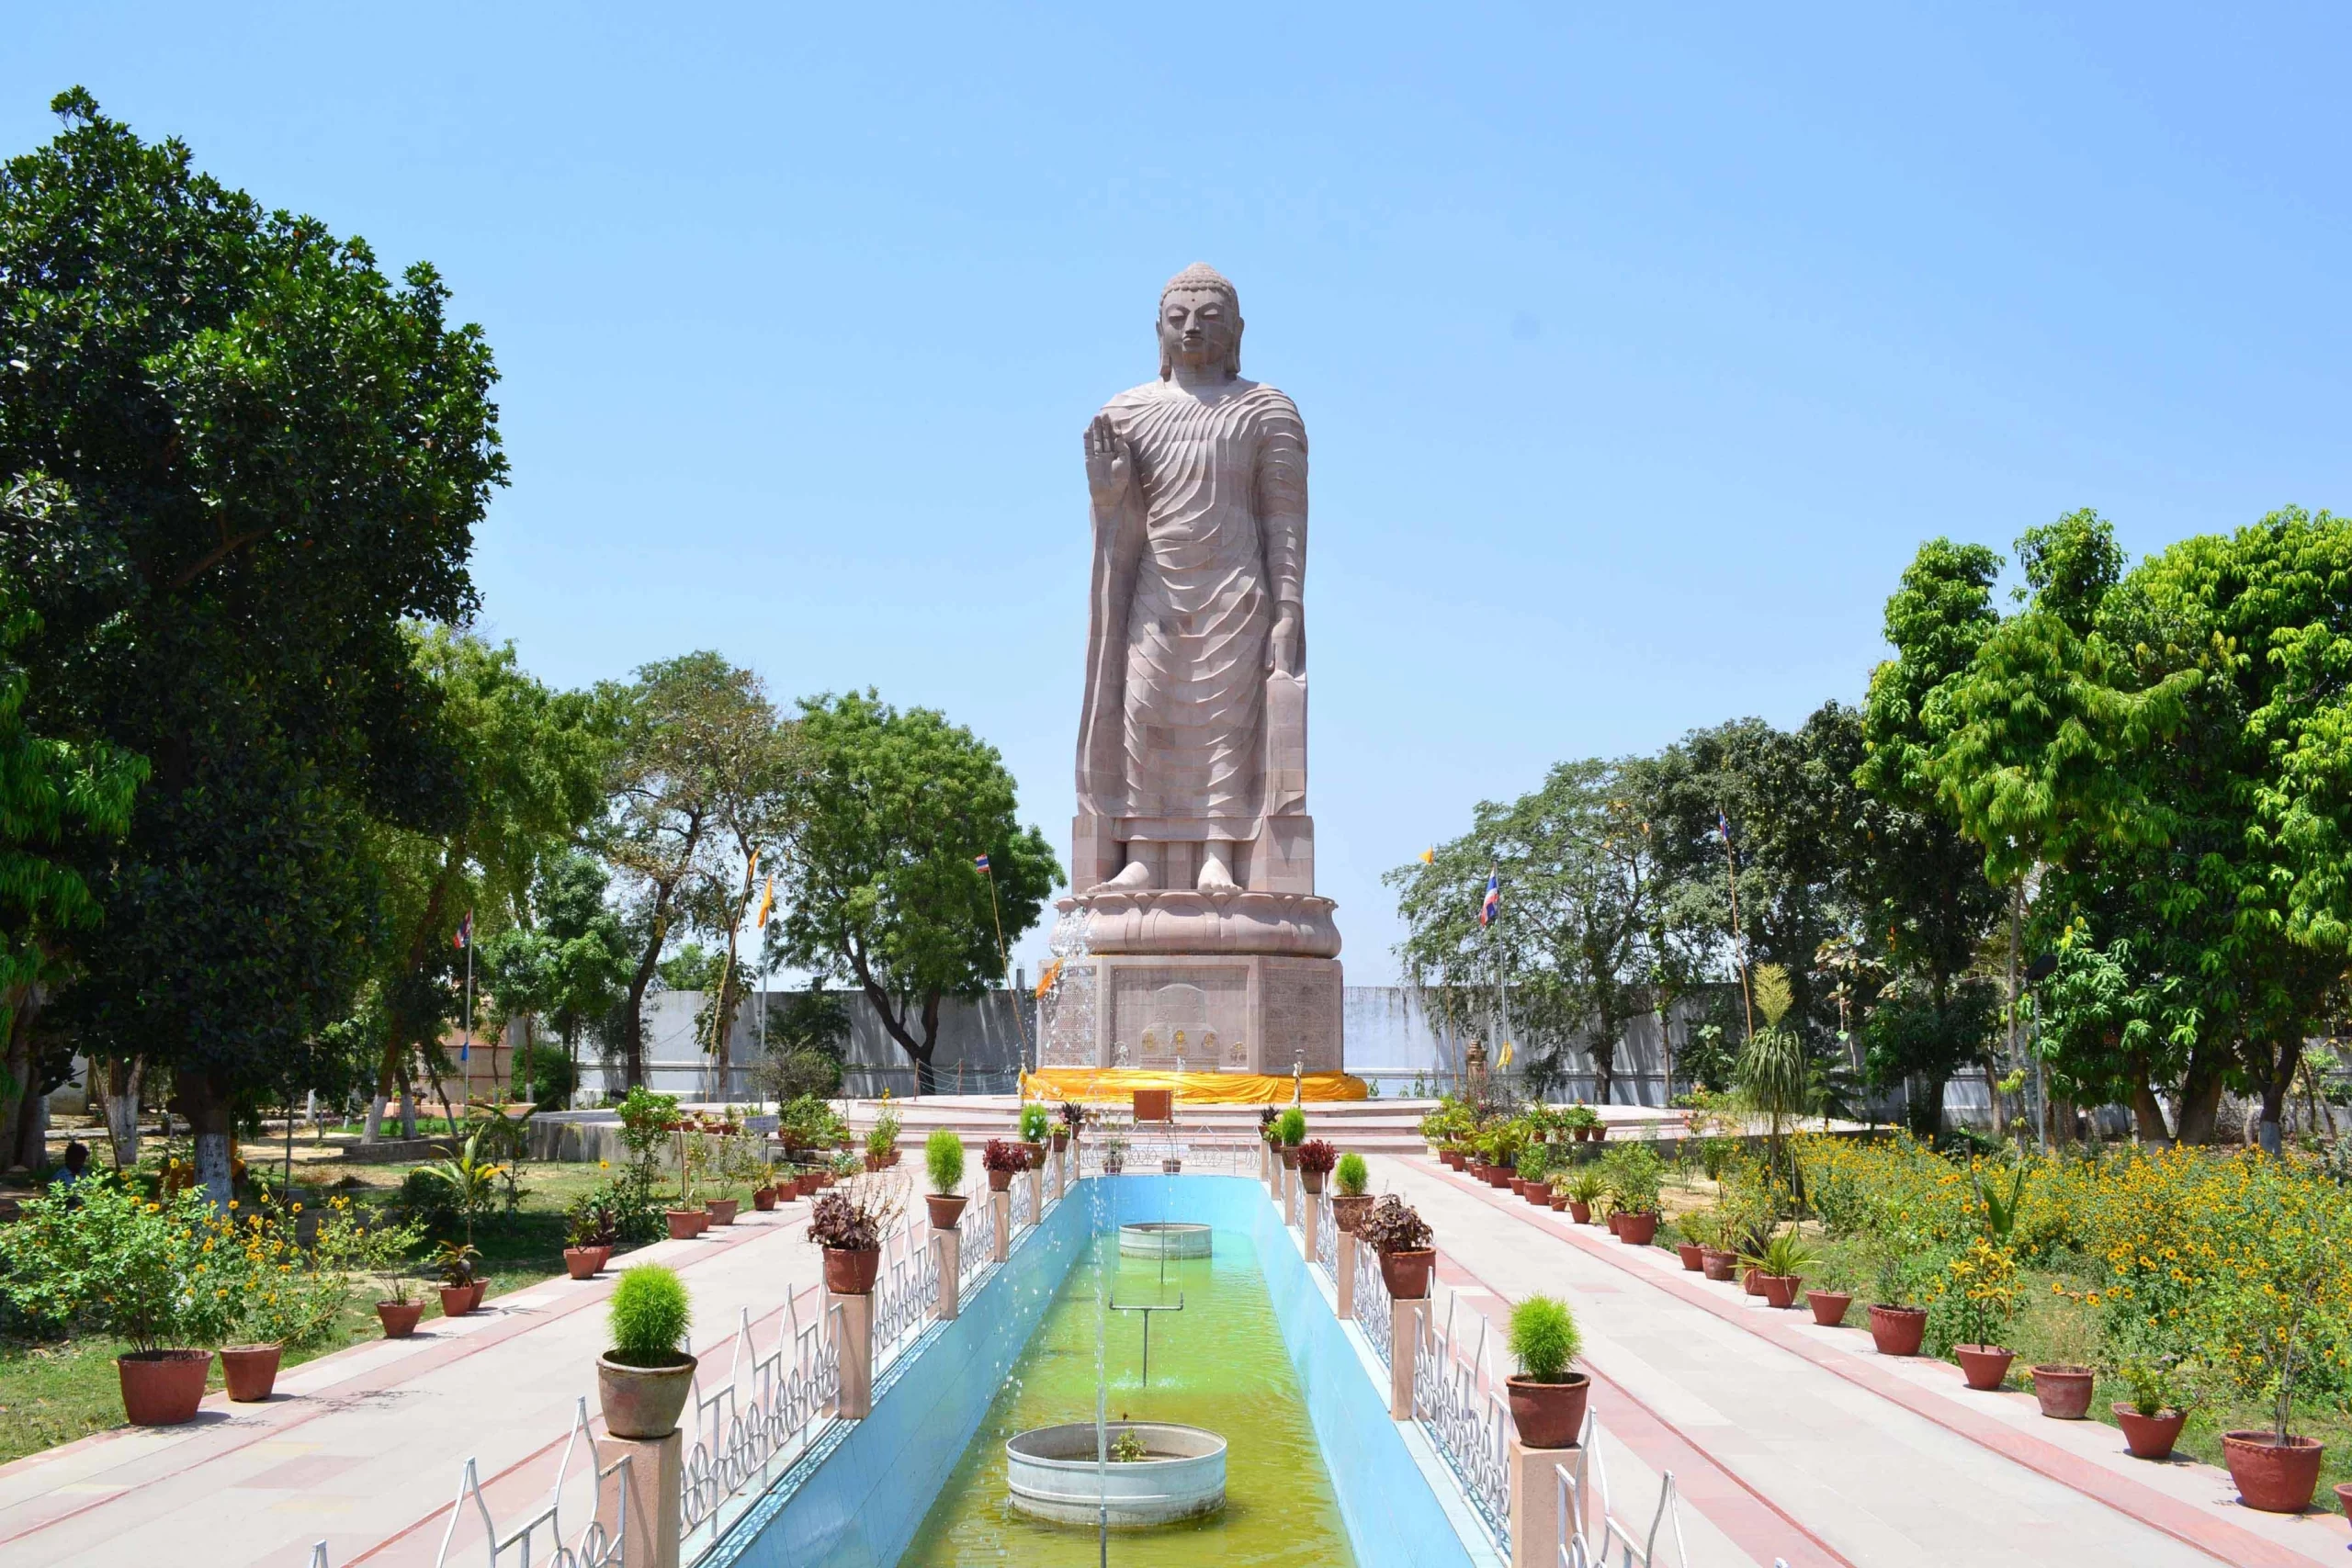 Tranquil Deer Park in Sarnath, where Buddha delivered his first sermon, surrounded by lush greenery and serene atmosphere, perfect for meditation and contemplation.